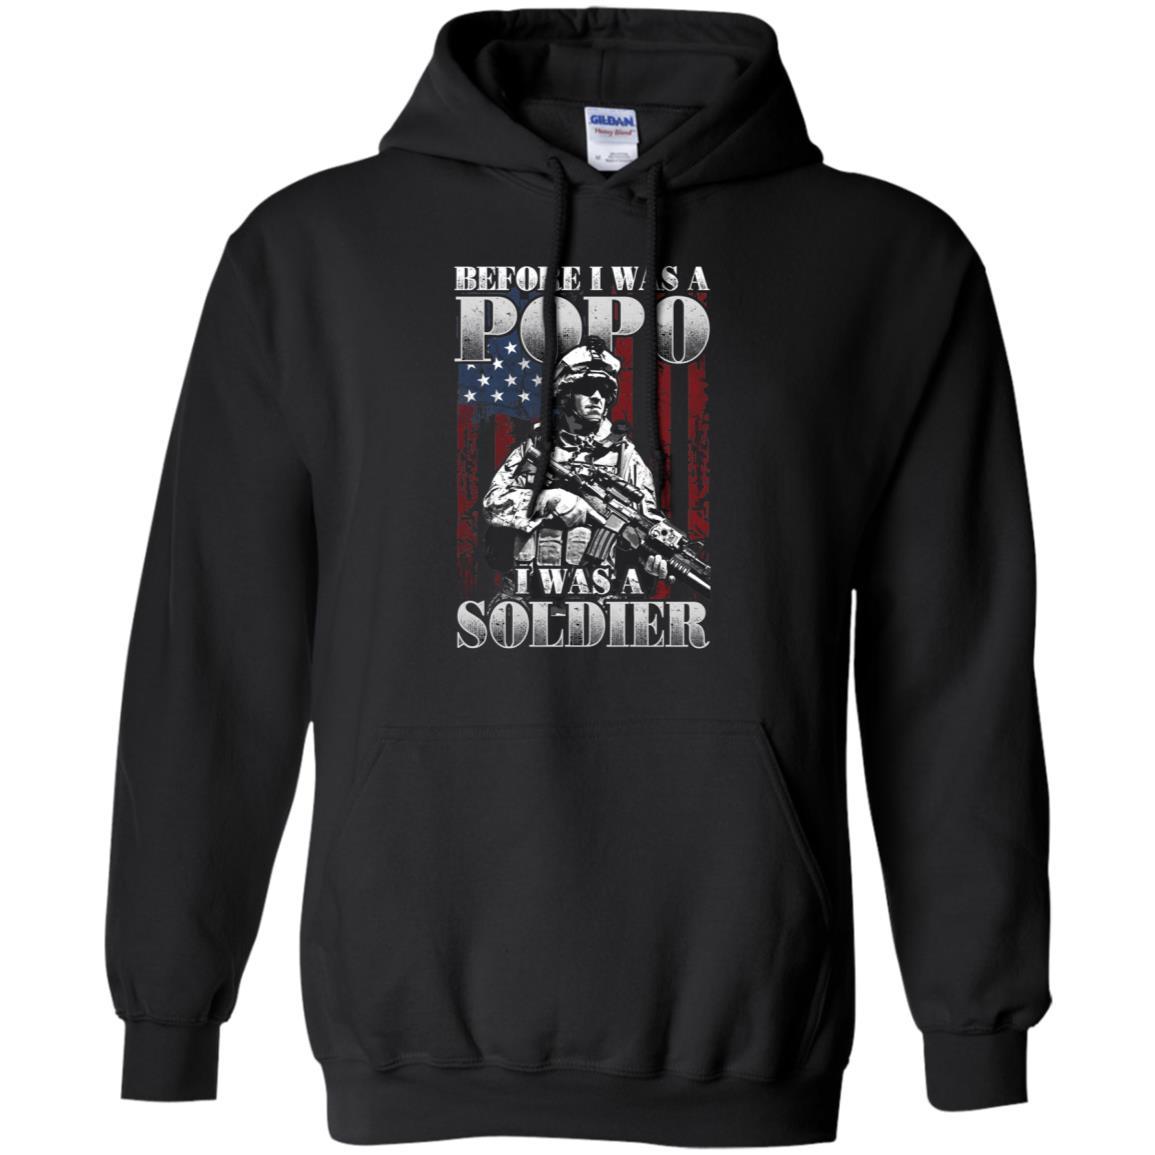 Military T-Shirt "BEFORE I WAS A POPO I WAS A SOLDIER On" Front-TShirt-General-Veterans Nation